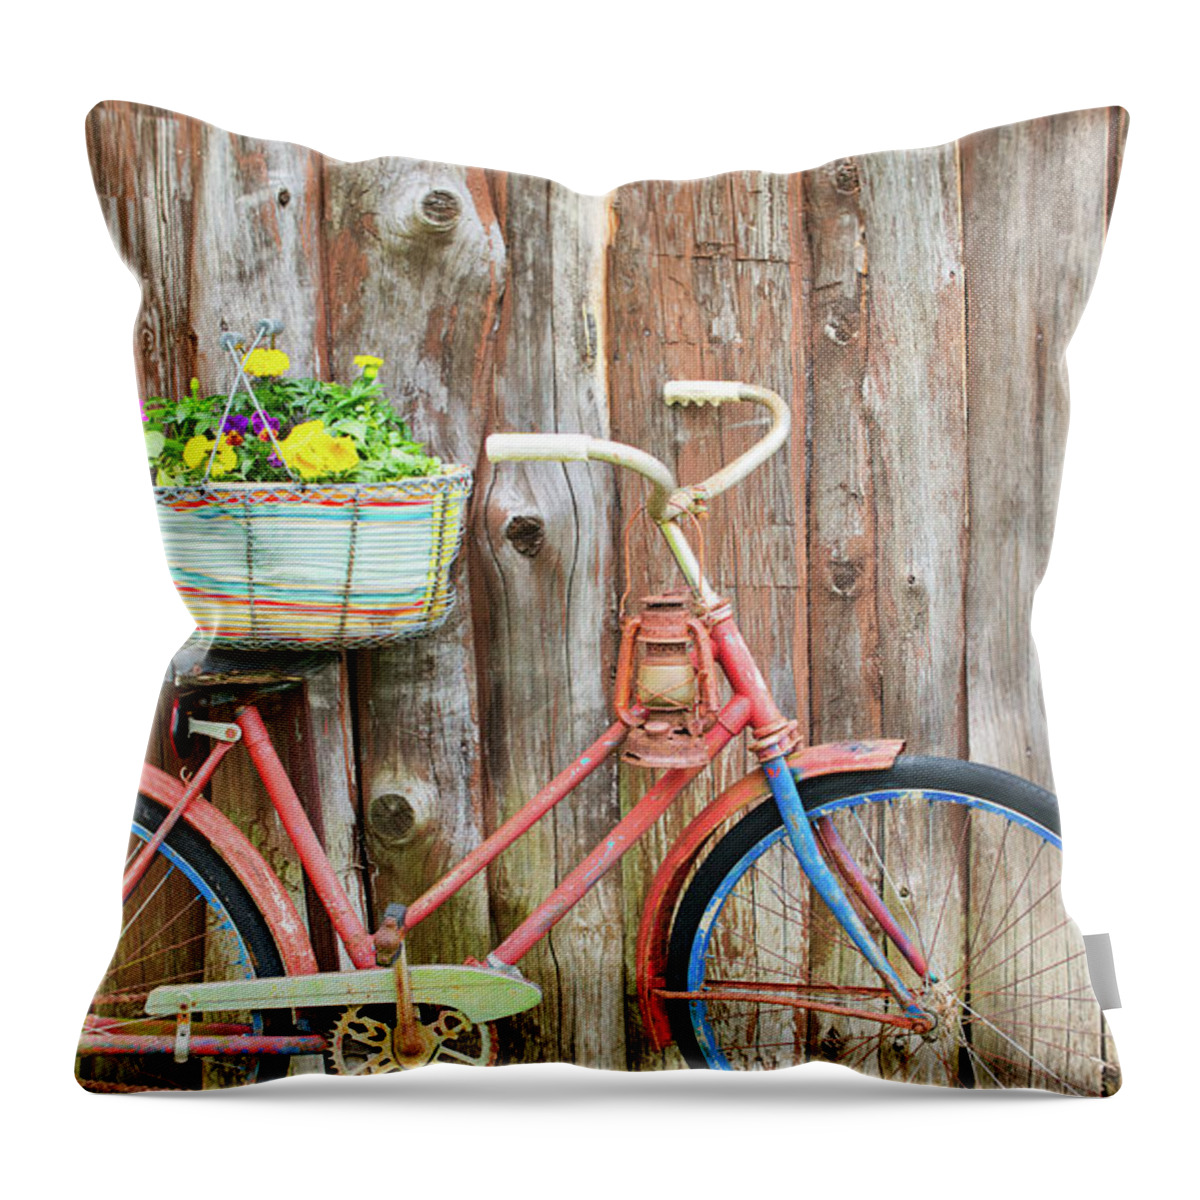 Aberfoyle Market Throw Pillow featuring the photograph Vintage Bicycles by Nick Mares